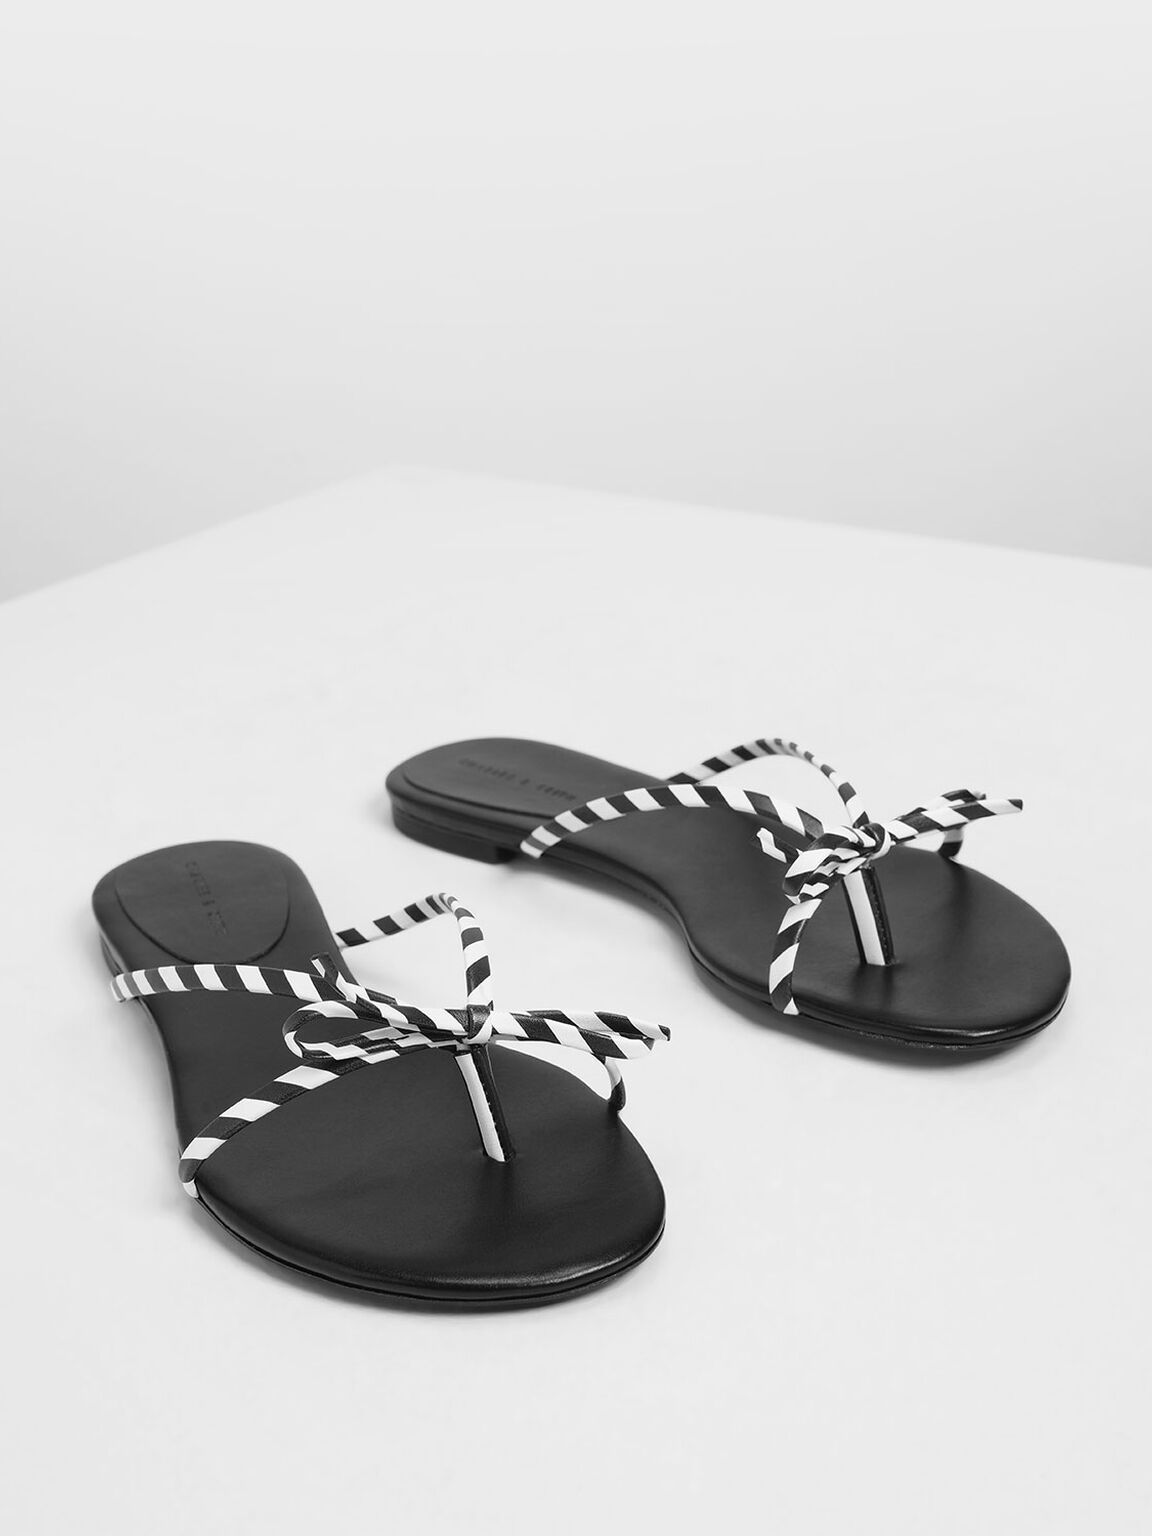 Summer Fashion Guide: Choose Best Comfortable Sandals for Women